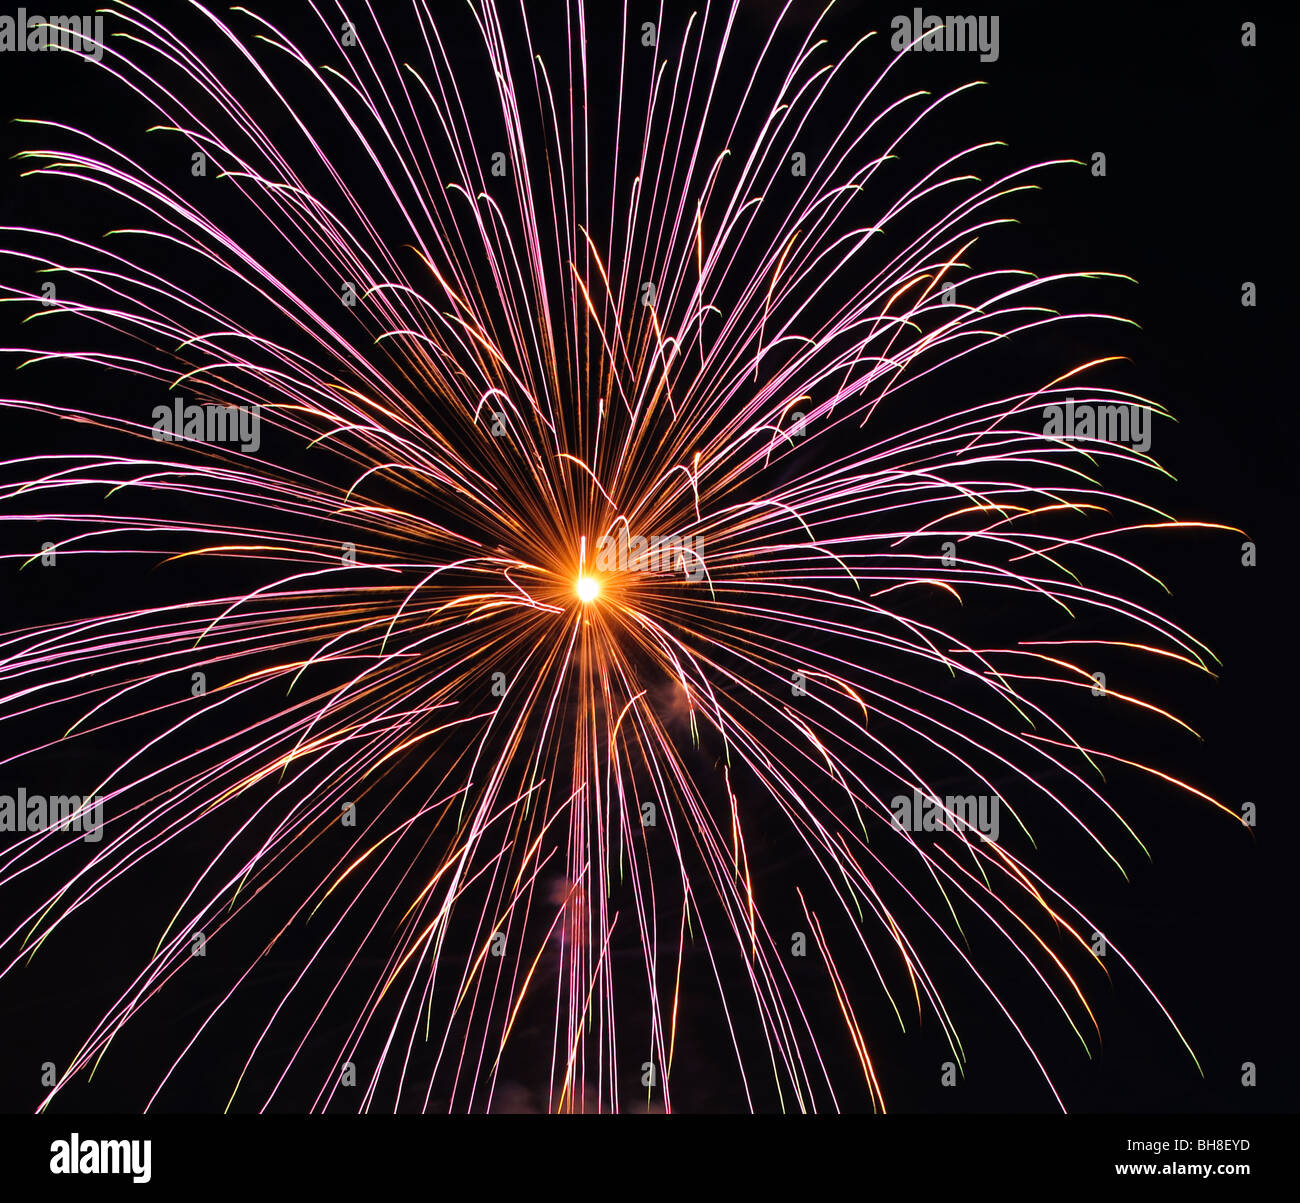 A colorful fireworks display going off in the night Stock Photo